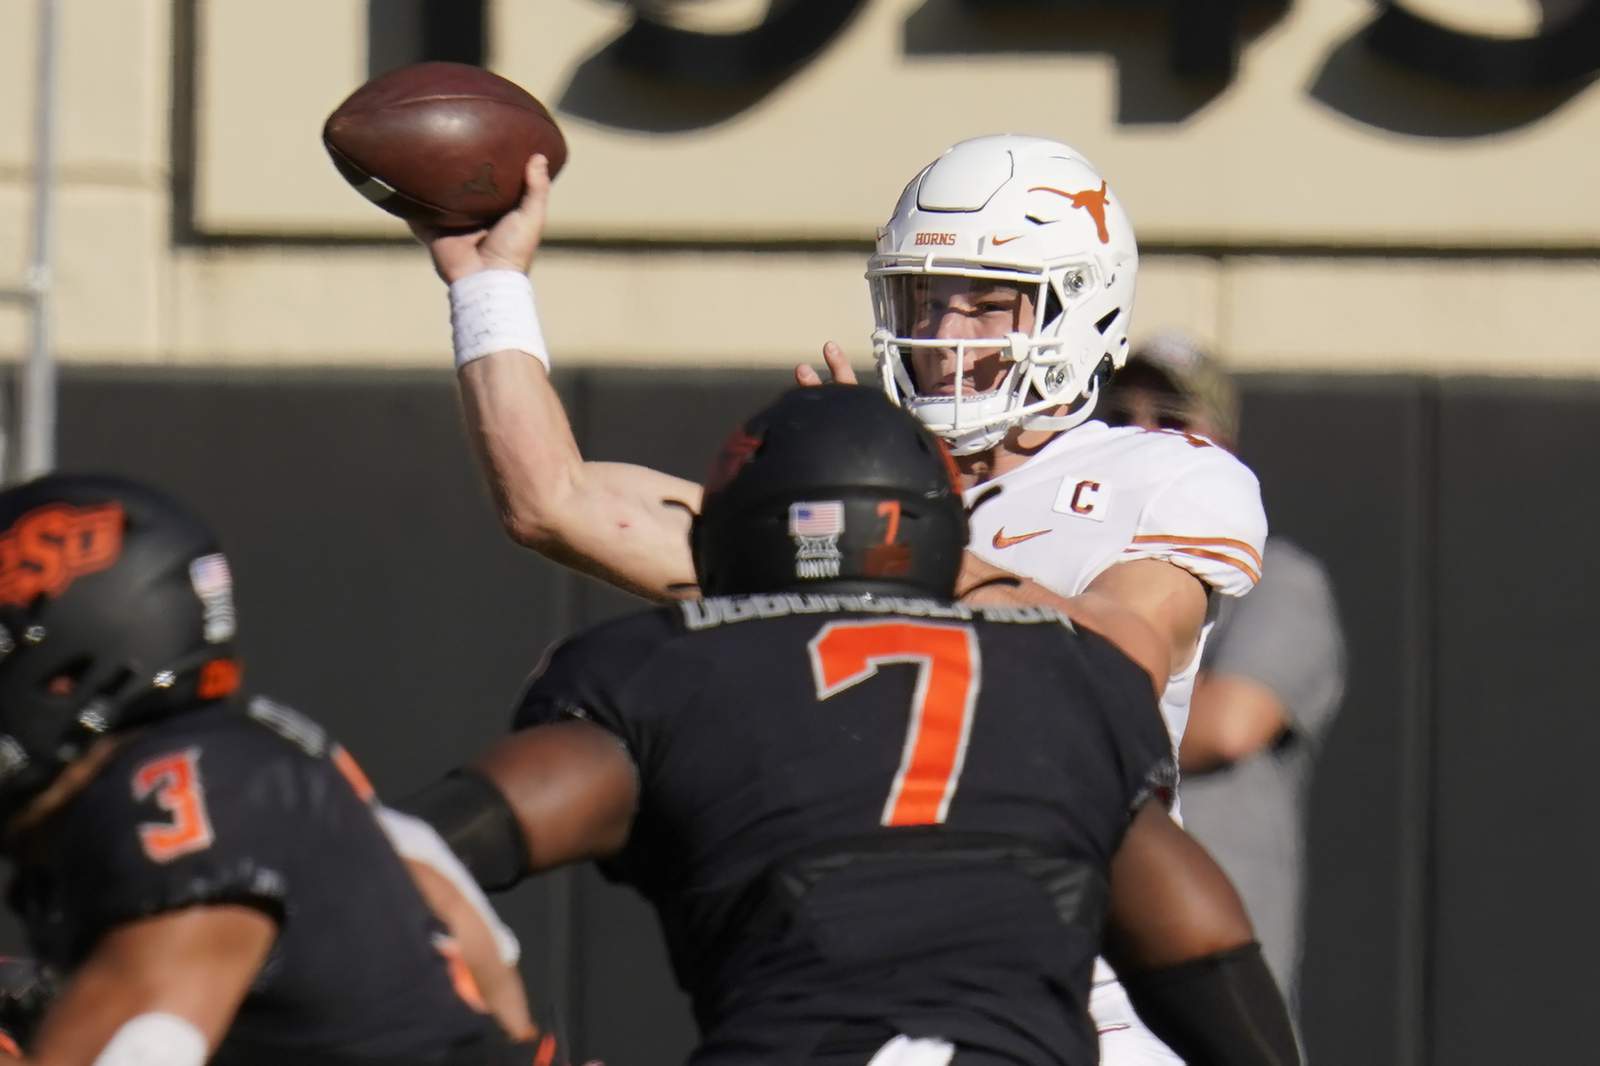 Ehlinger's TD pass helps Texas beat No. 6 Oklahoma St. in OT